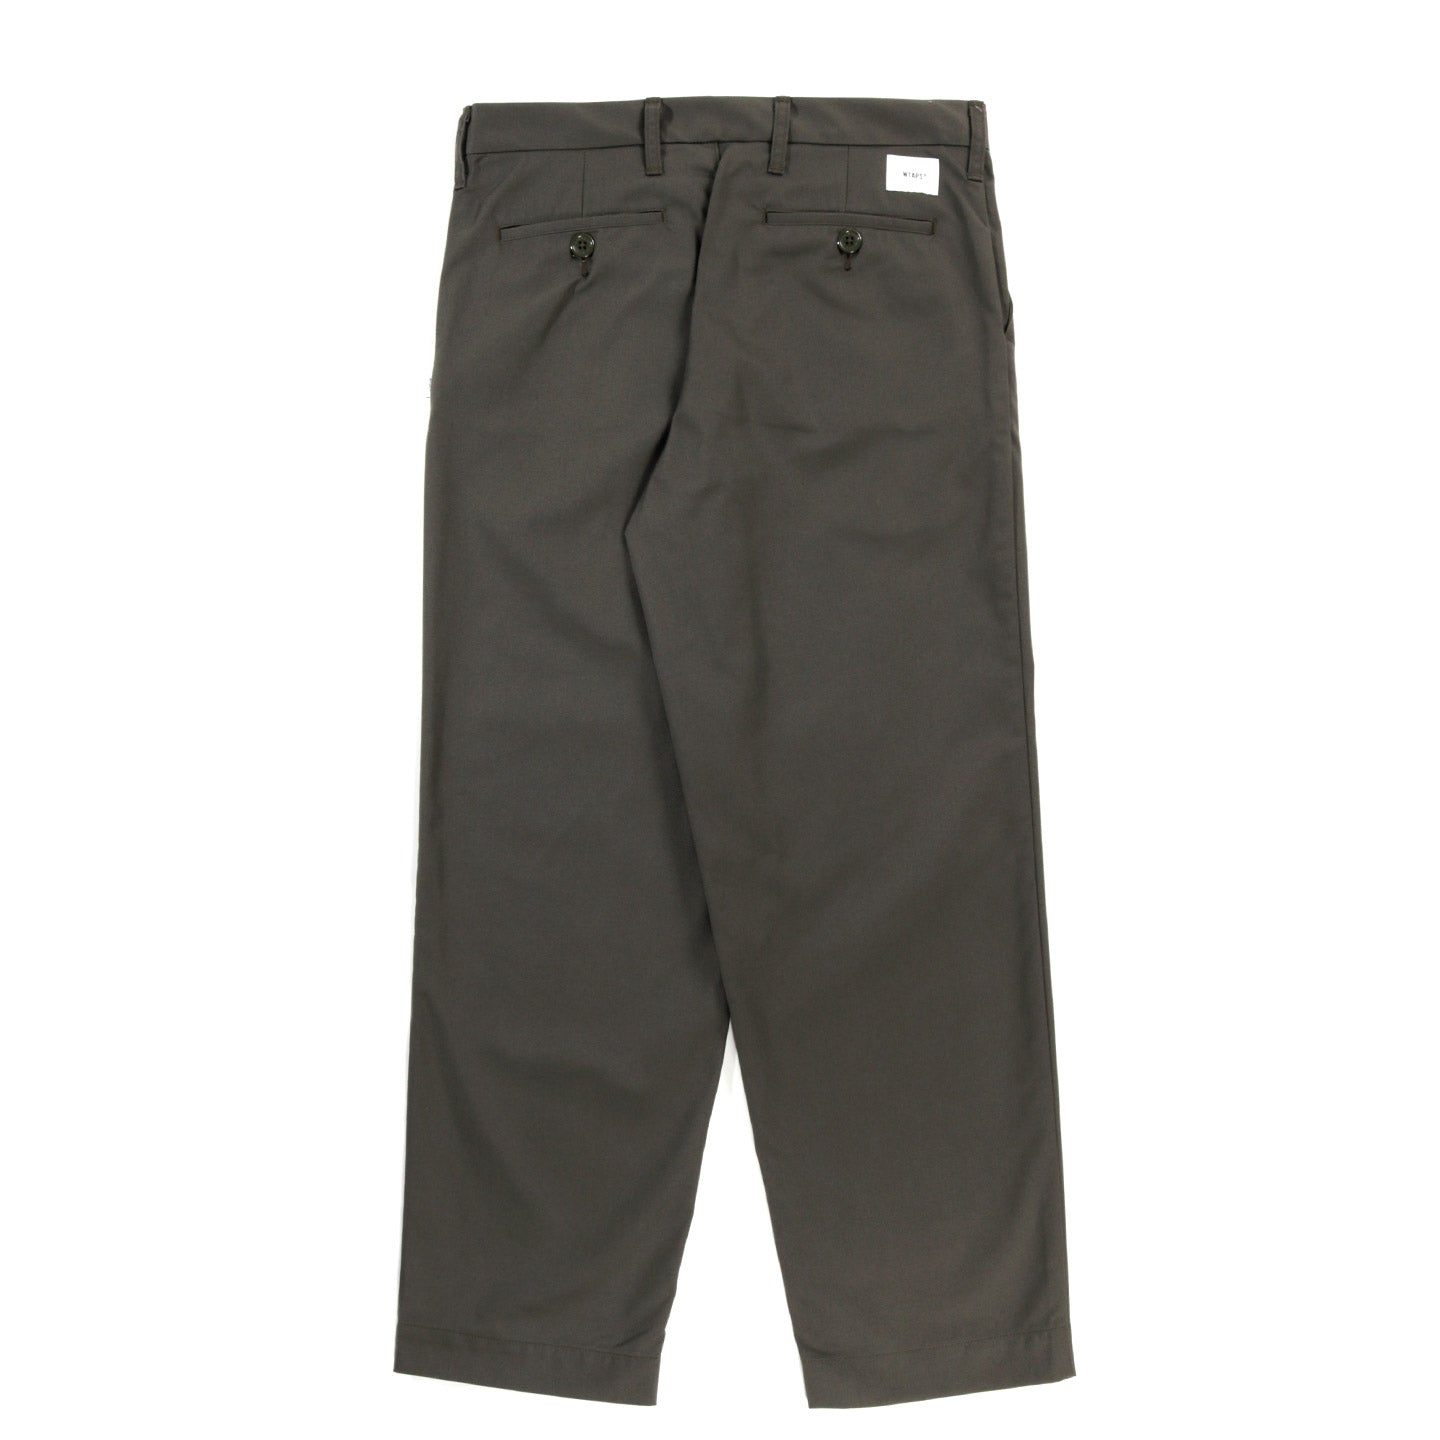 WTAPS CREASE TROUSERS OLIVE DRAB POLY COTTON TWILL